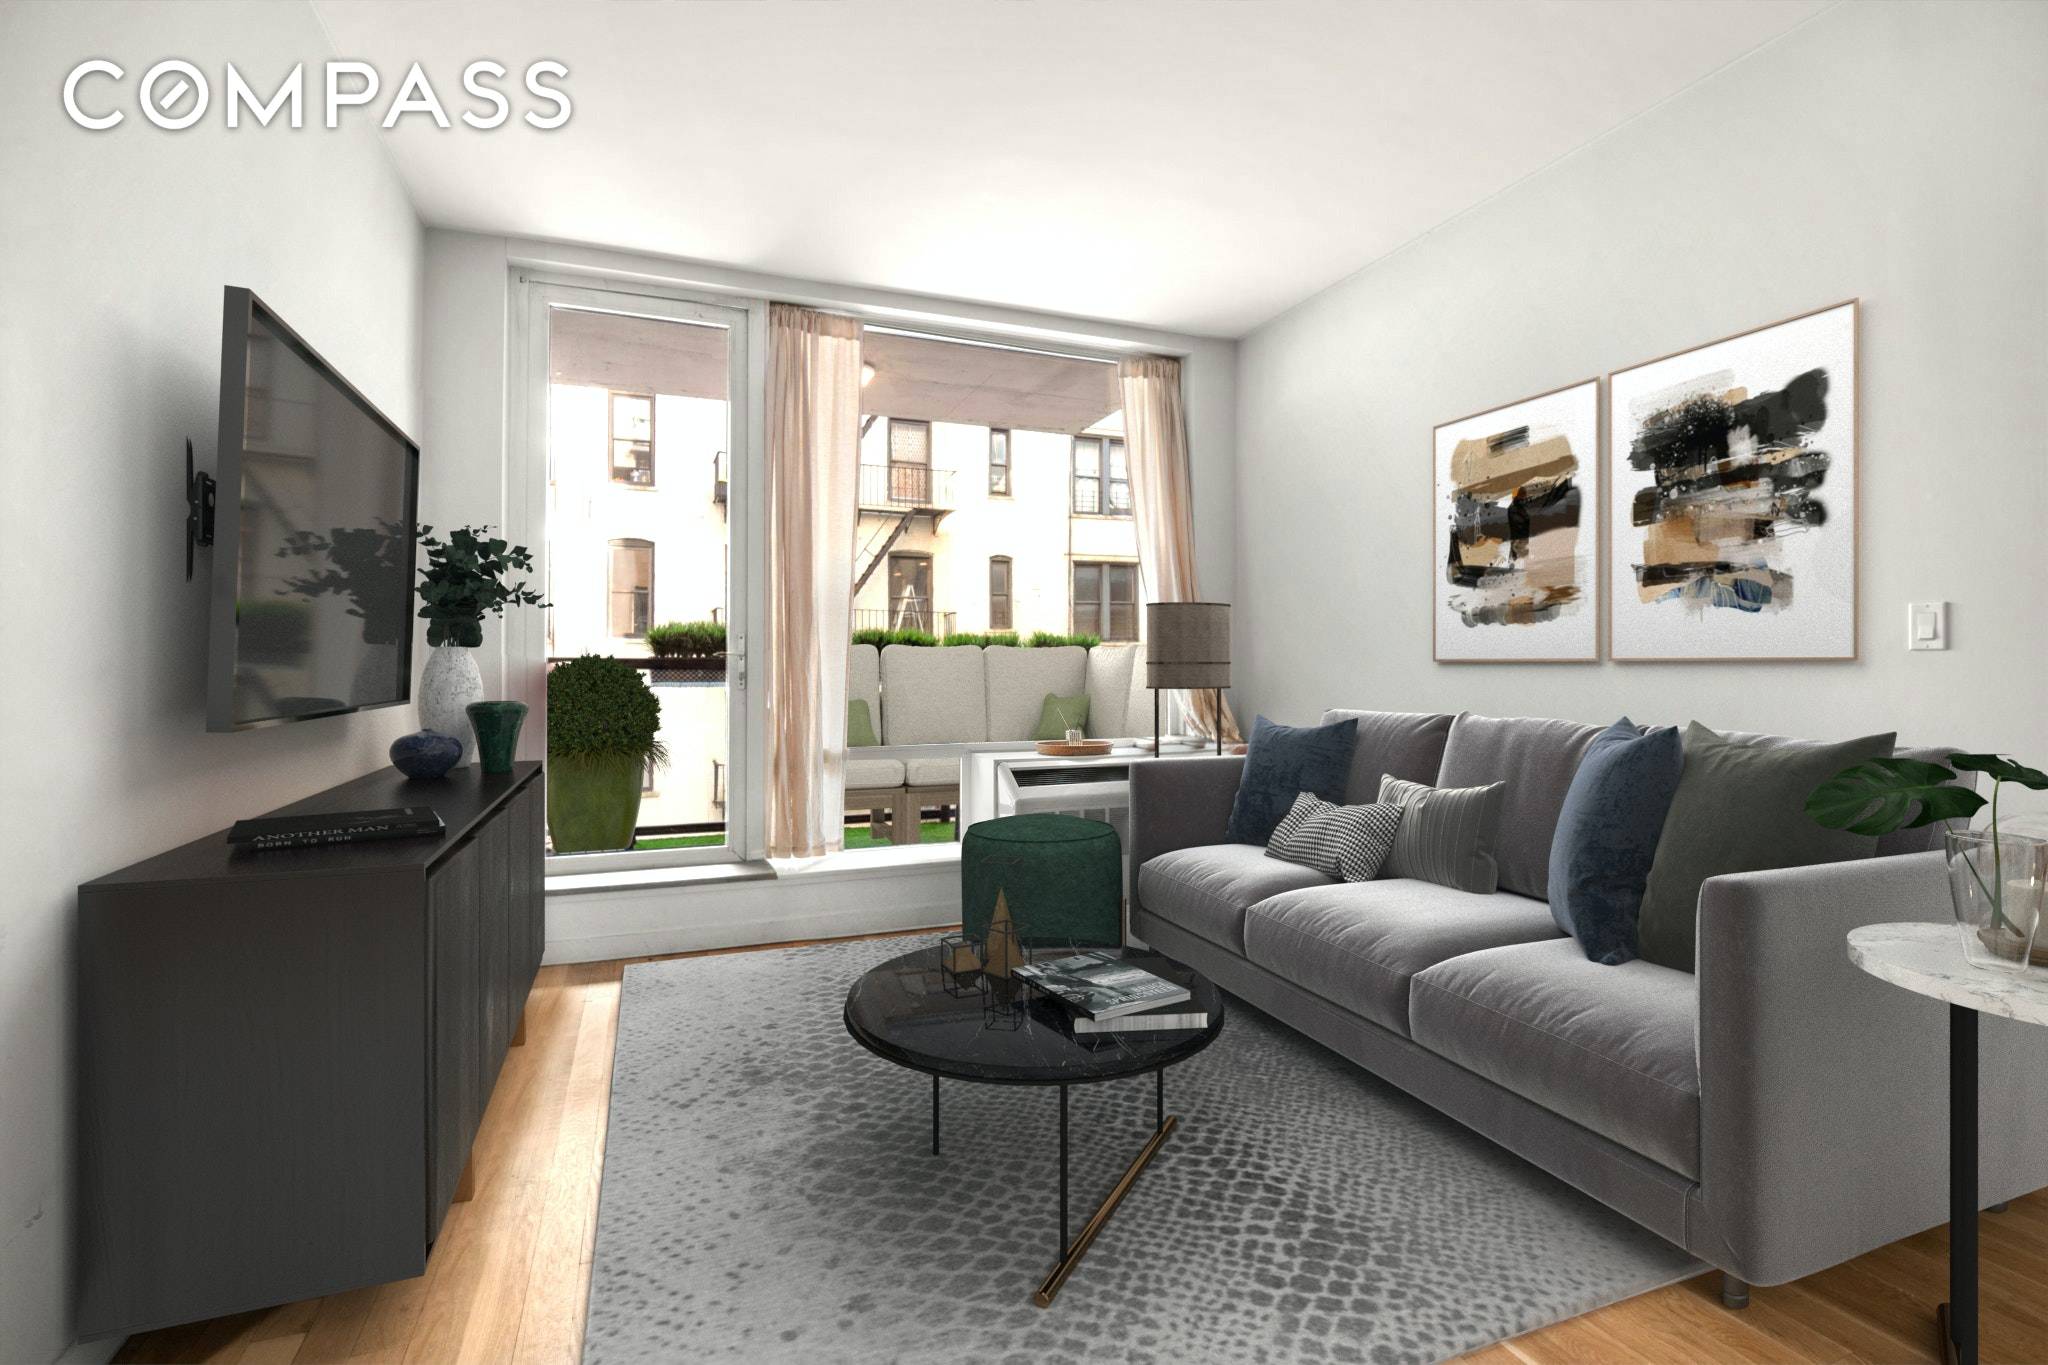 Welcome to the Morningside Condominium where boutique luxury meets a prime Harlem address.